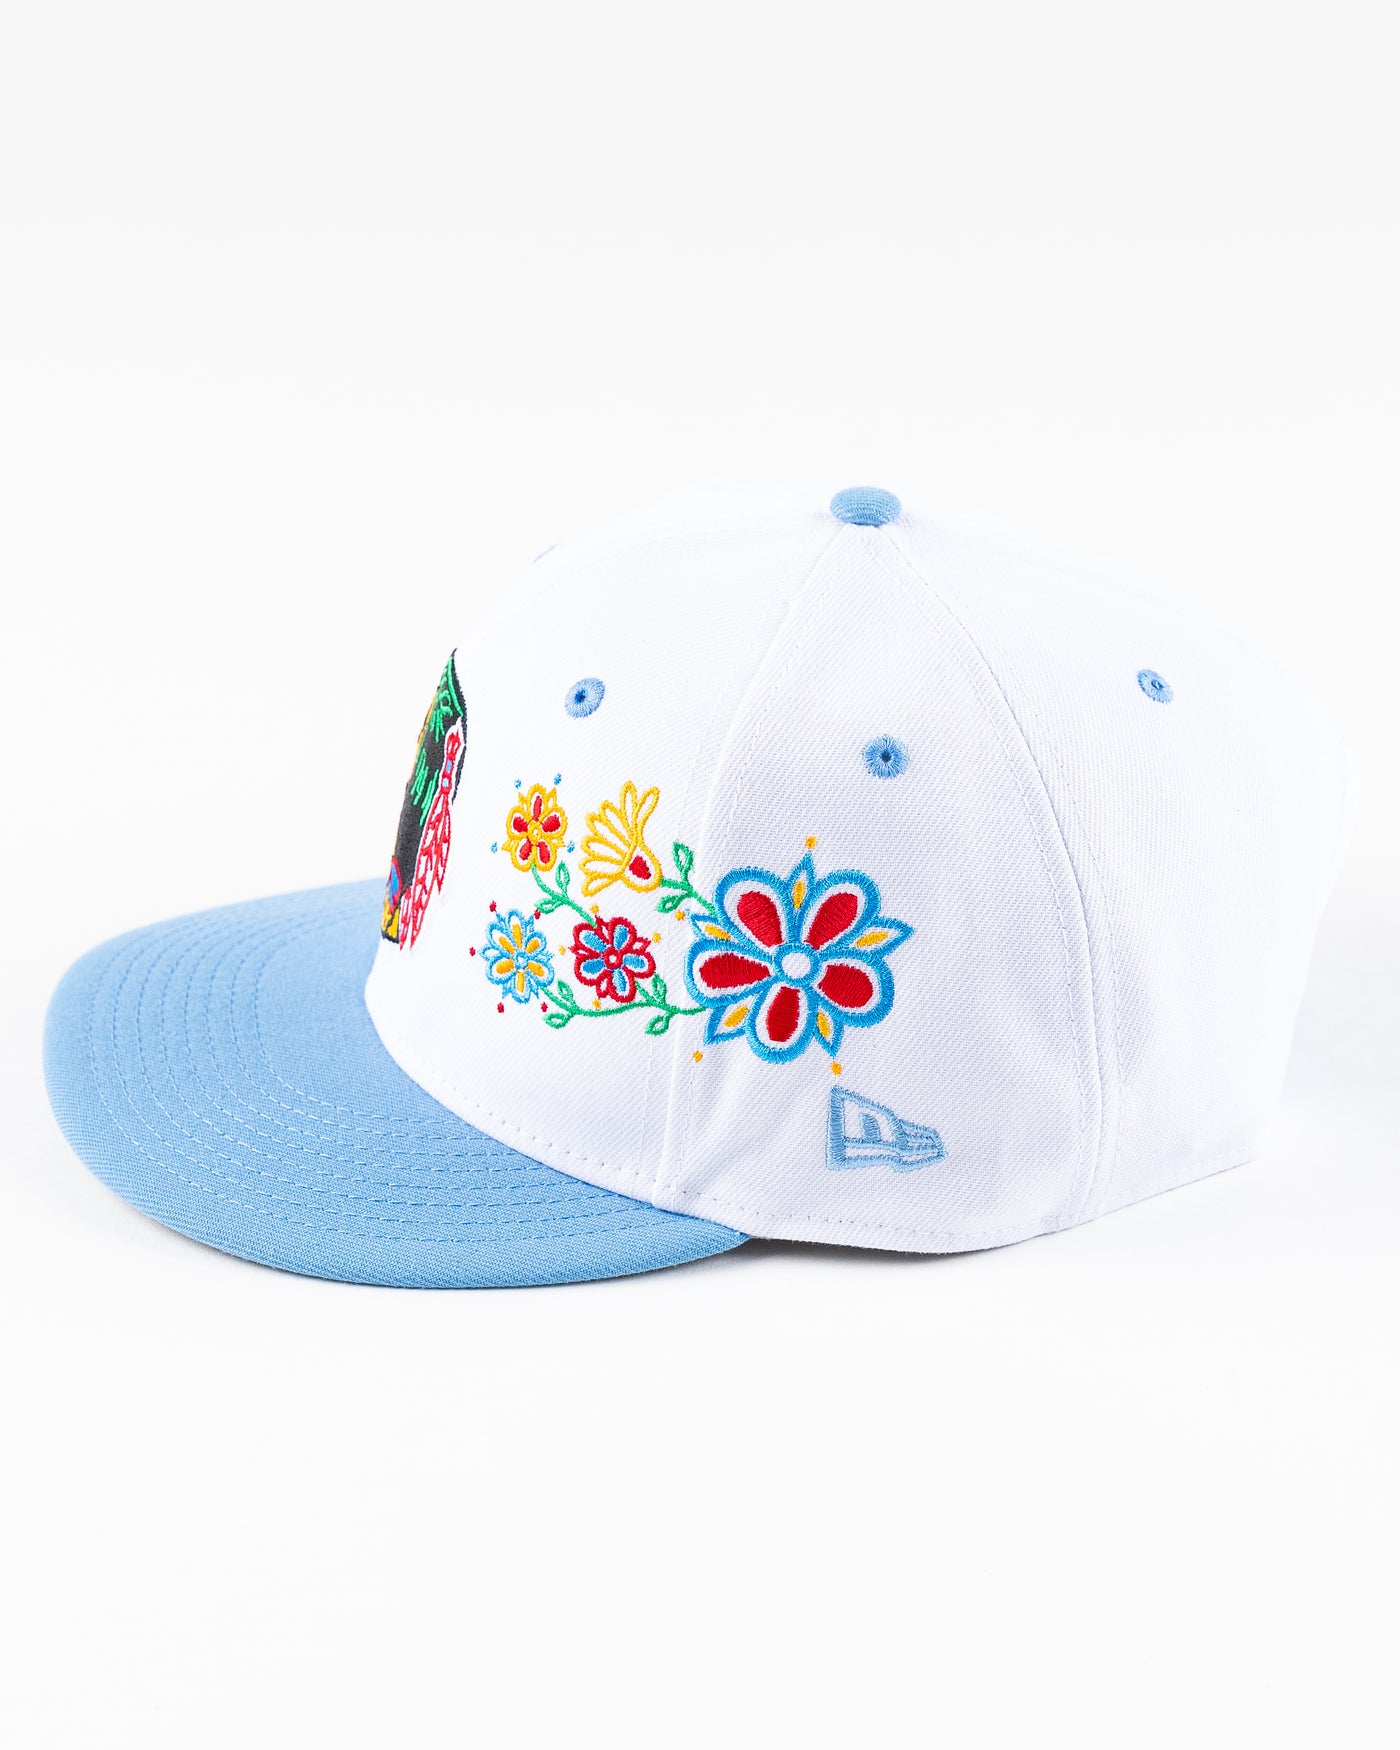 white and blue New Era snapback with vintage Chicago Blackhawks logo and floral pattern on front - left side lay flat